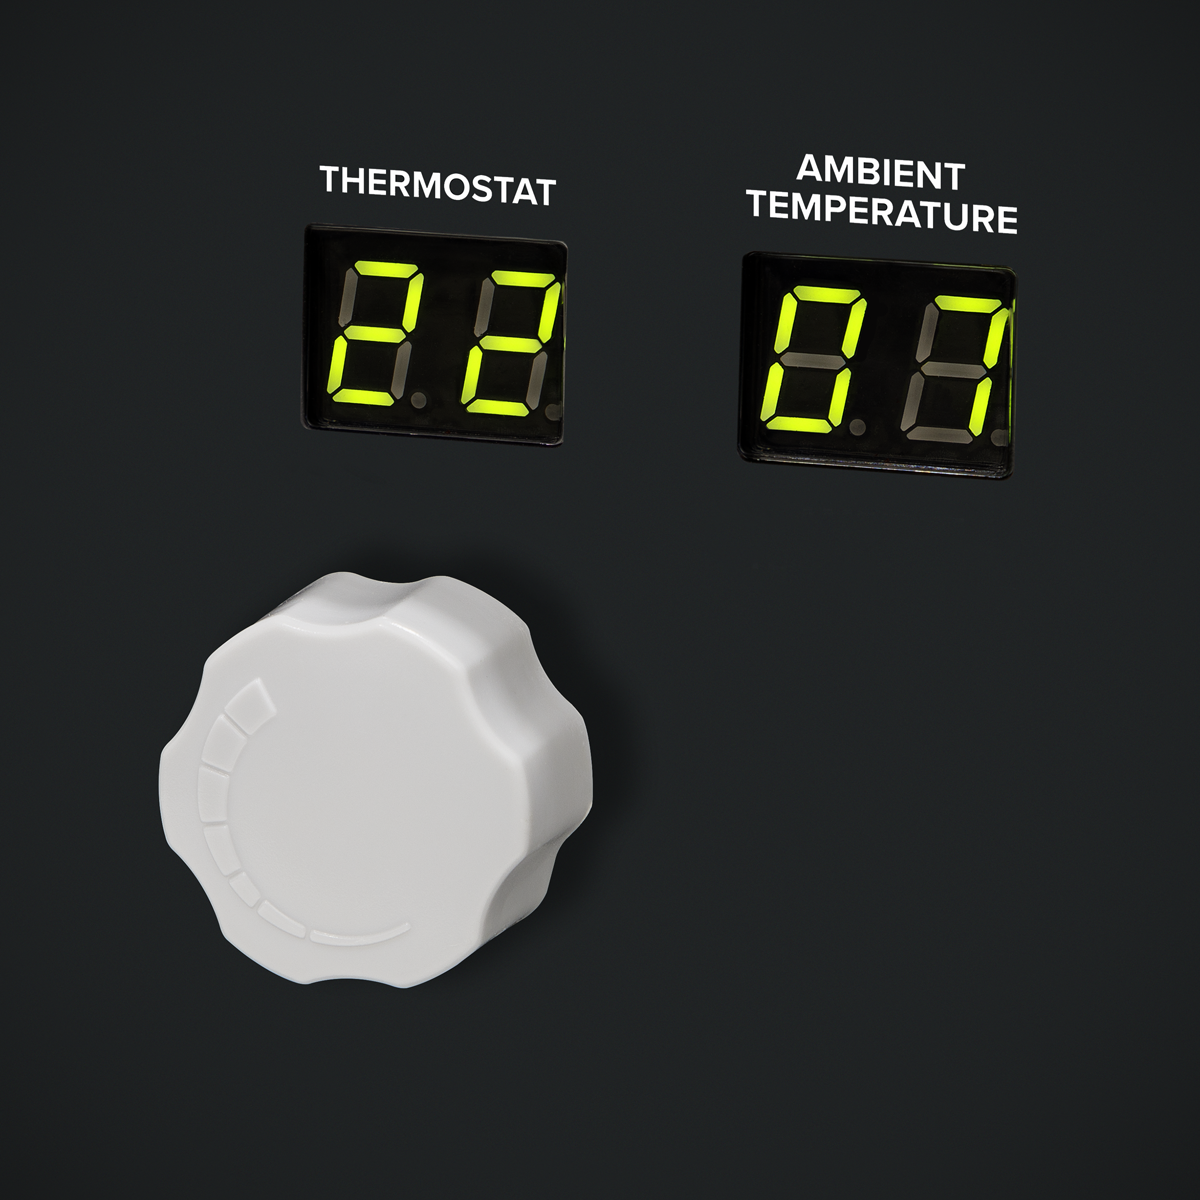 Dual LED Display for ambient and thermostatically controlled desired temperature.